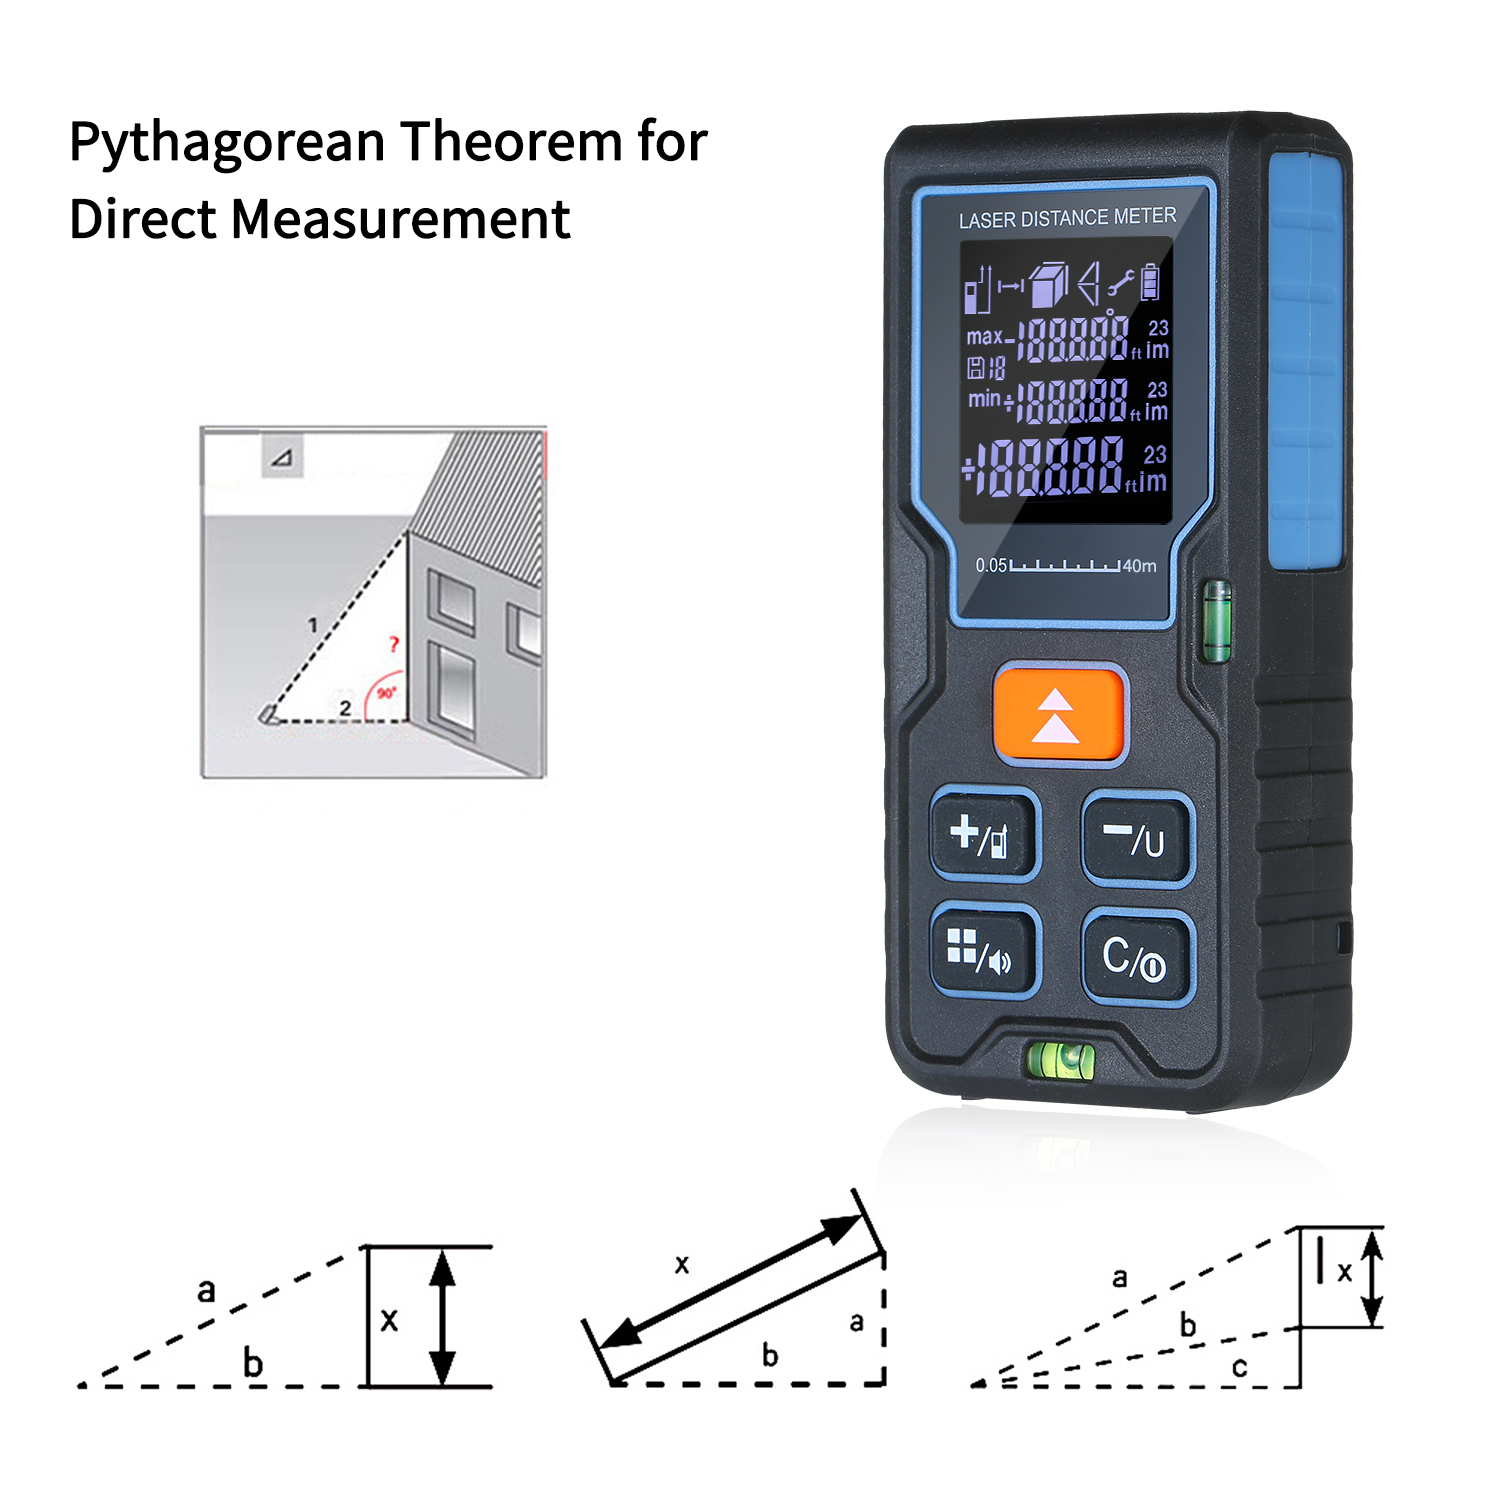 Range Finder Laser Distance Meter Distance Measuring with Single/Continuous/Area/Volume/Pythagoream Theorem Measurement Mode